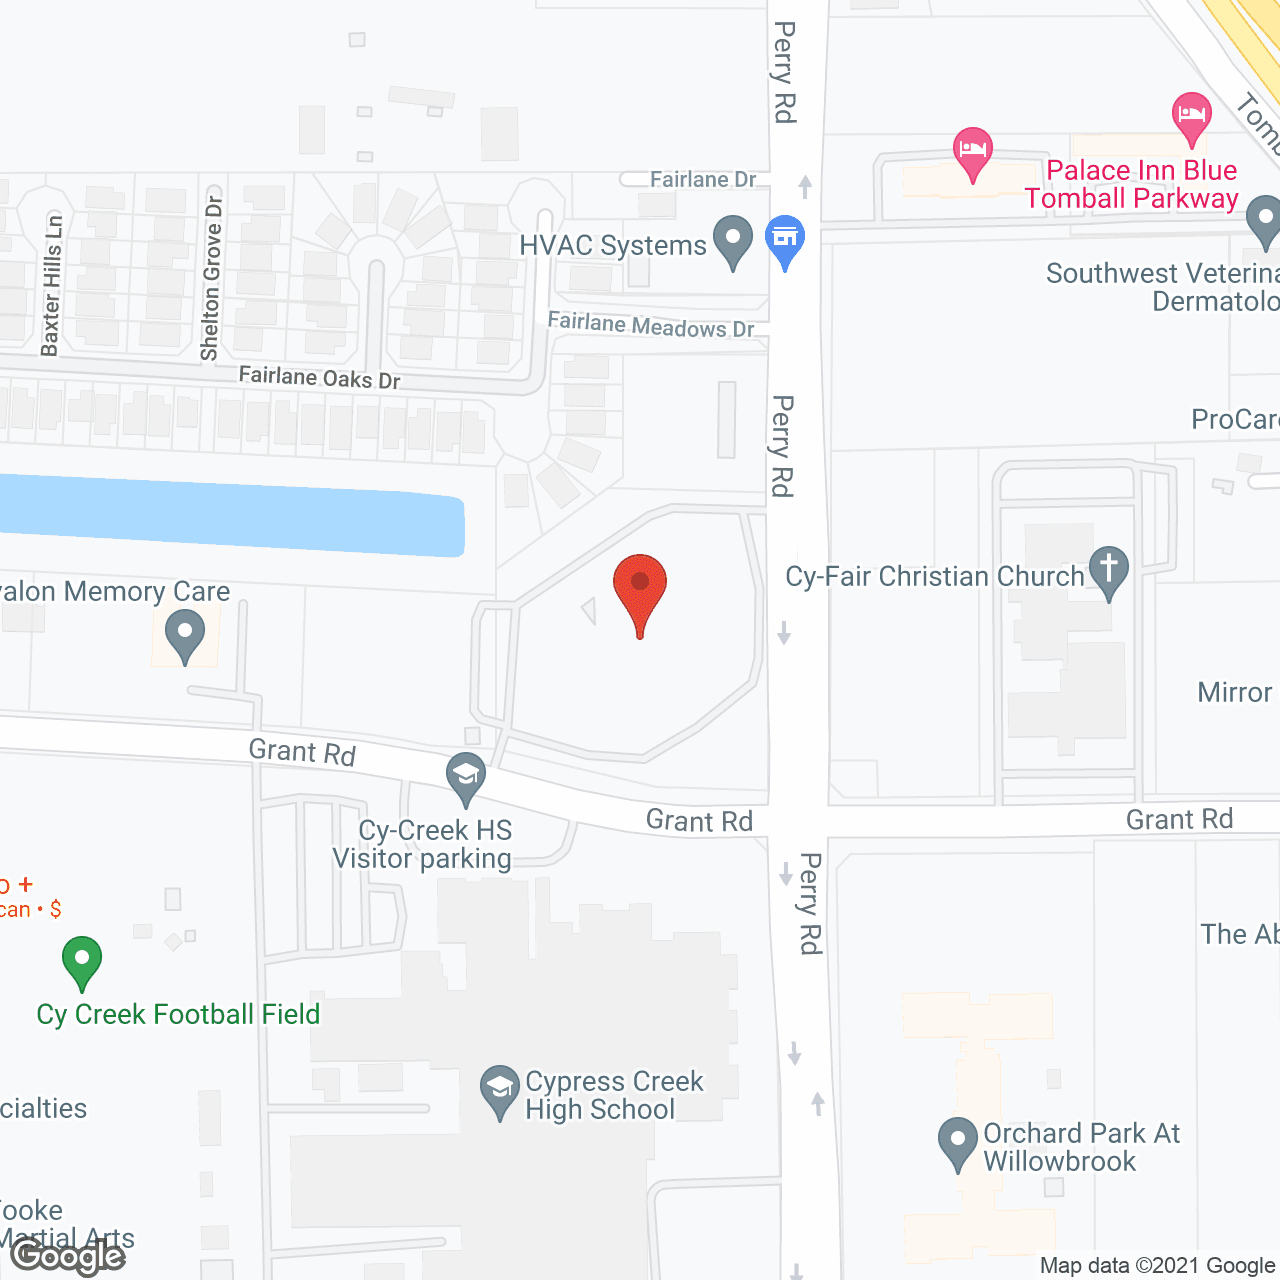 North Houston Transitional Care in google map